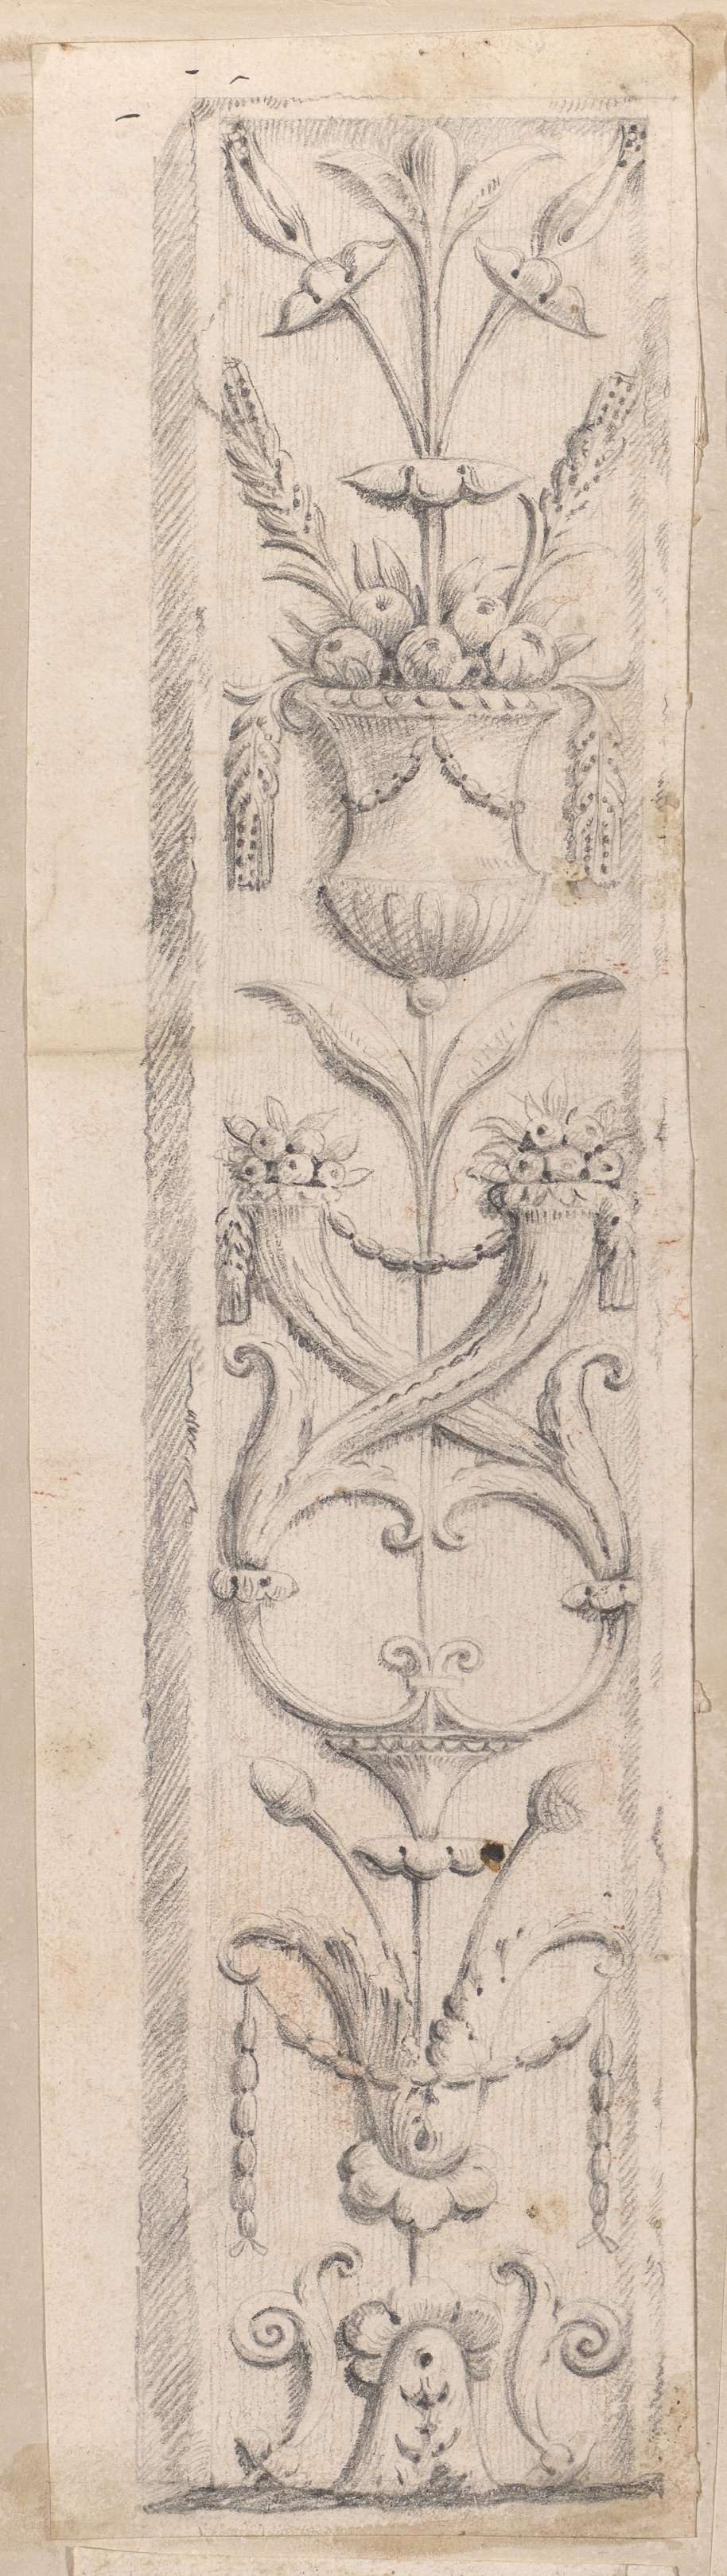 Visible reflectance photograph Pilaster drawn with black chalk with cornucopias, fruit bowl and floral motifs